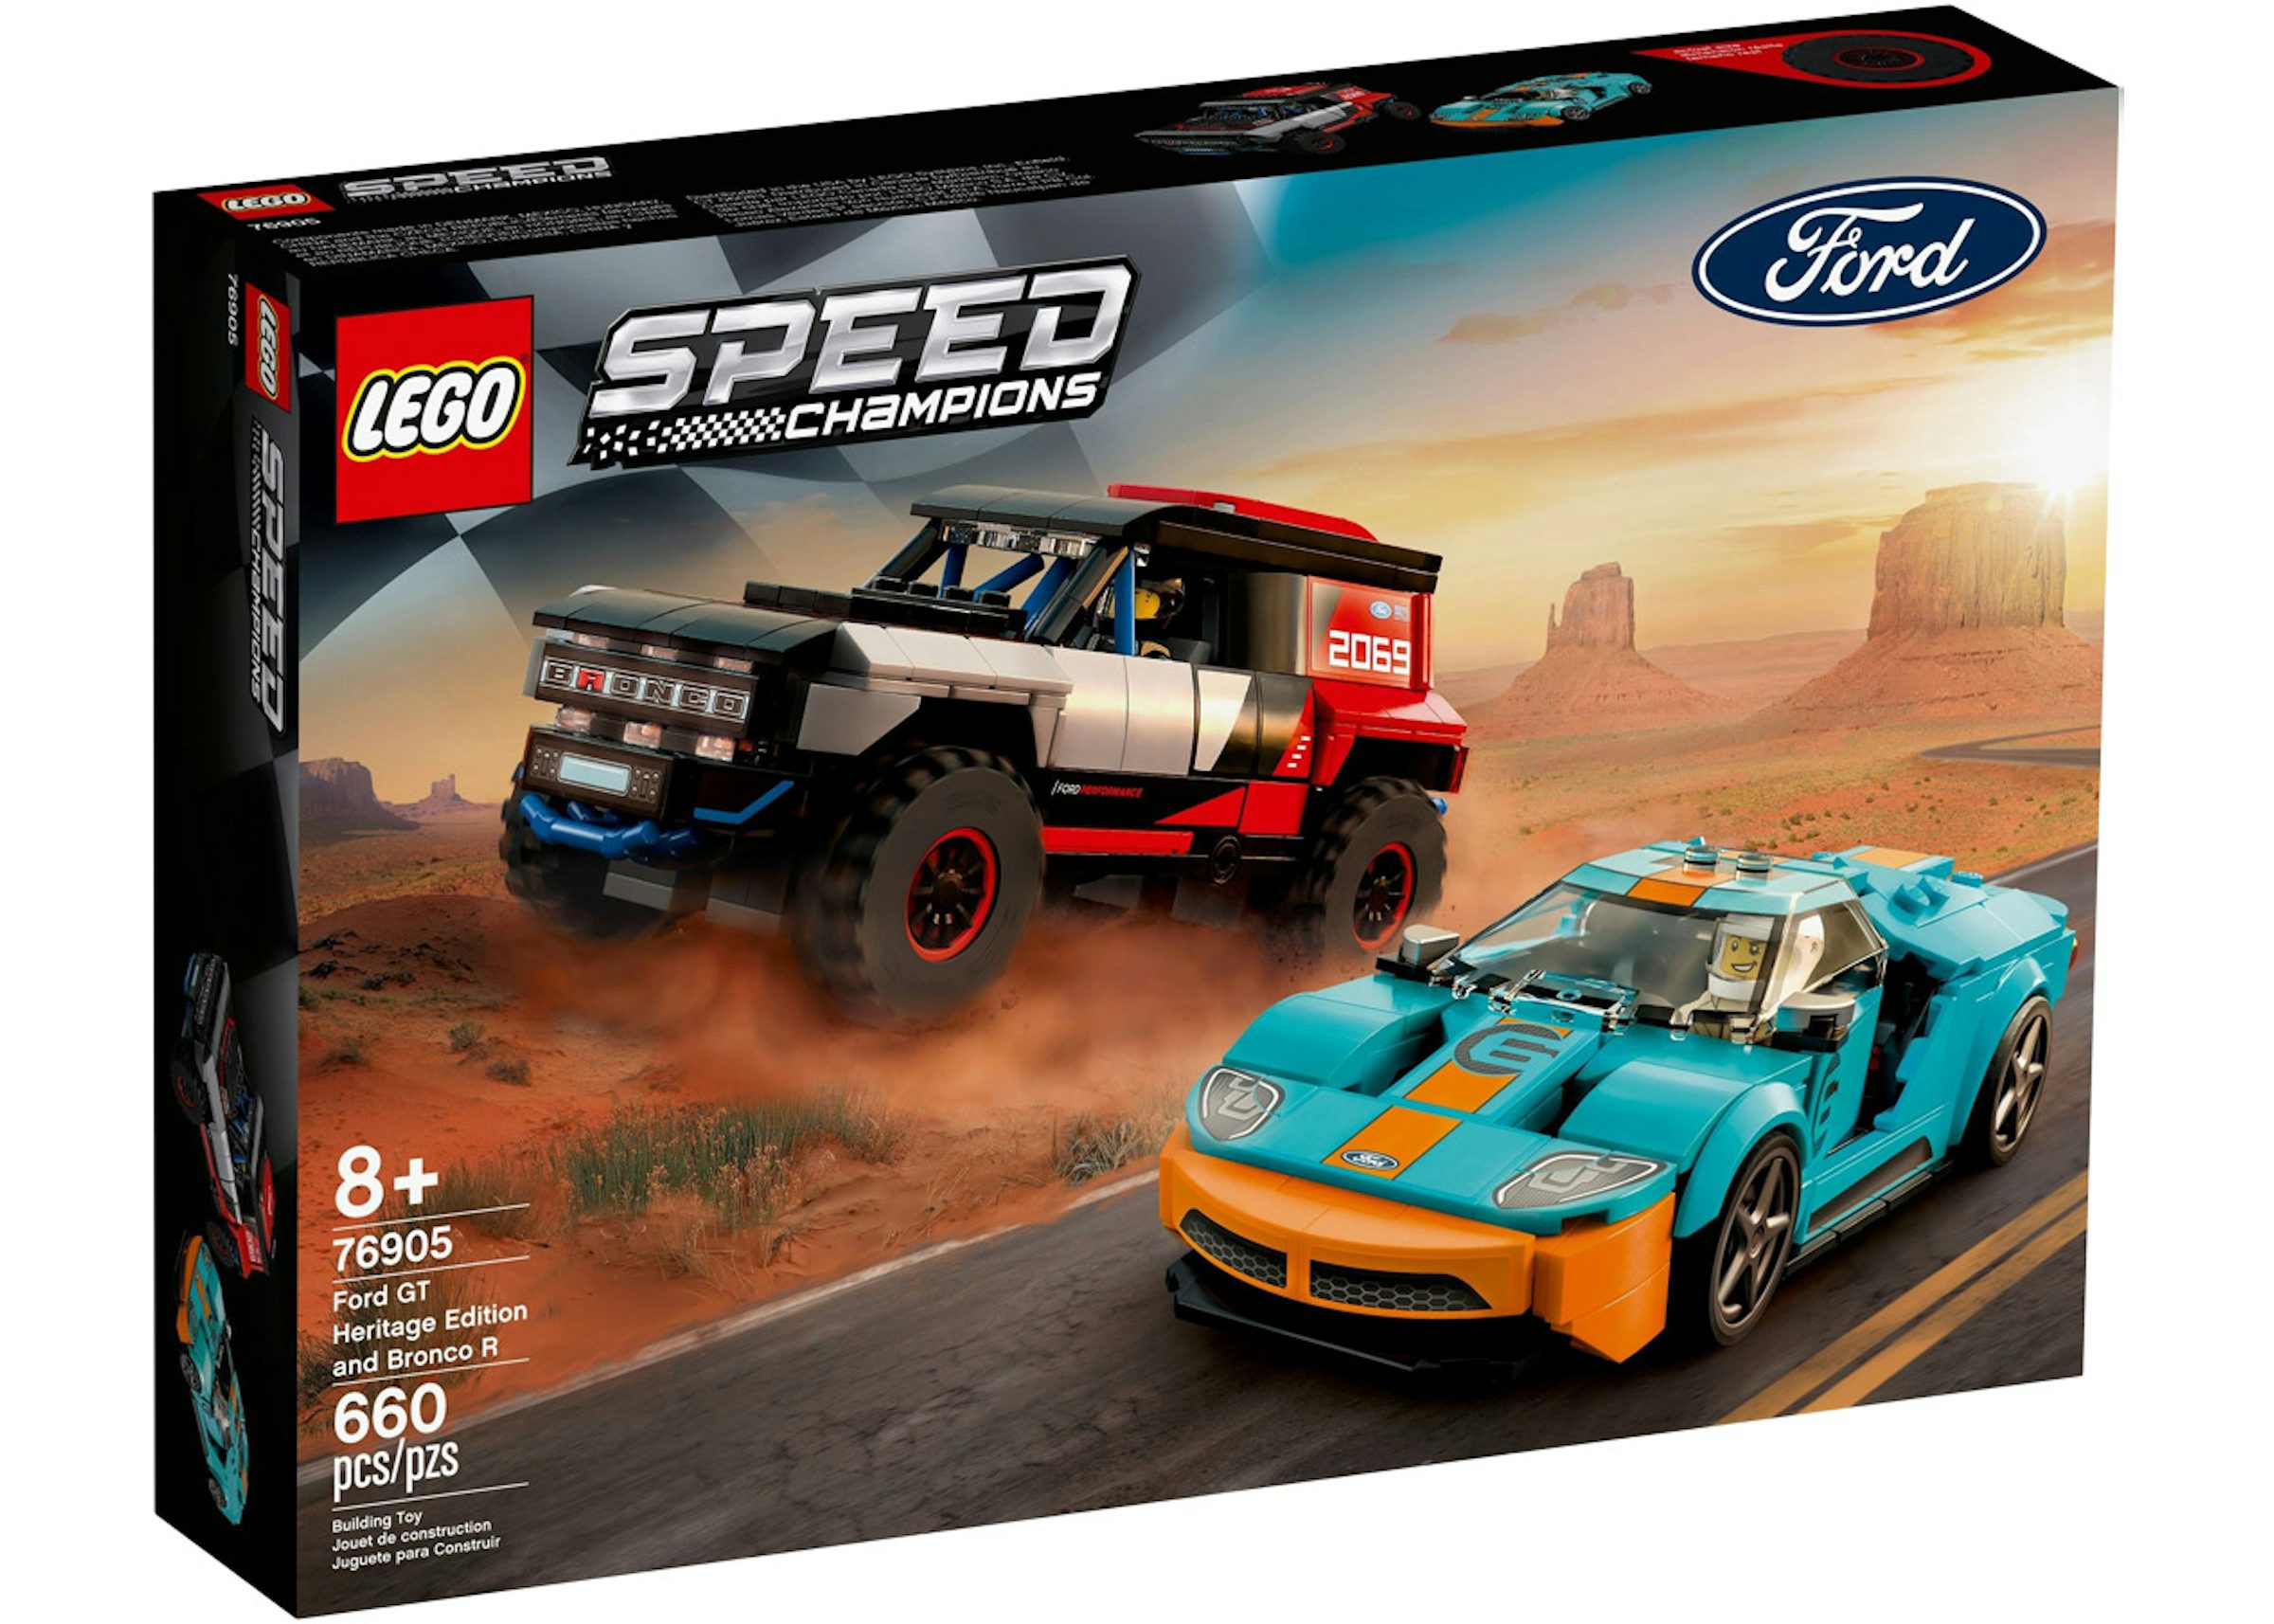 LEGO Speed Champions Ford GT Heritage Edition and Bronco R Set 76905 - US